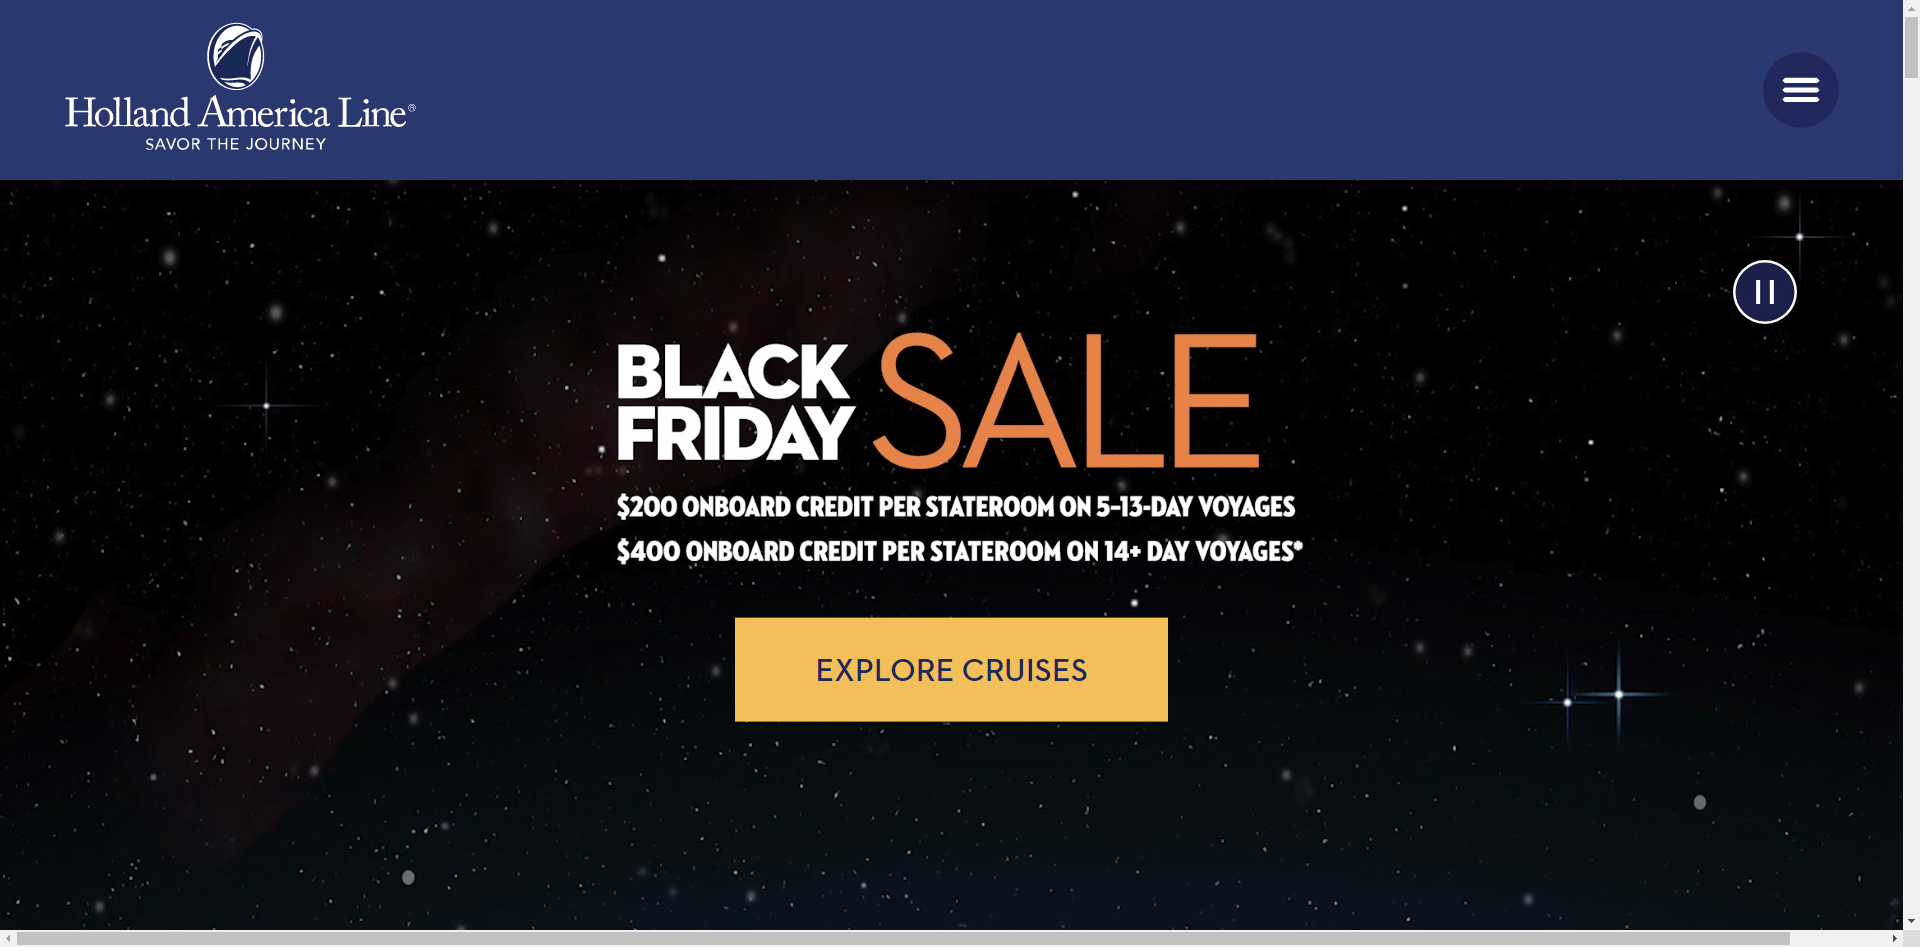 Up to $400 off Holland America Line Cruises Black Friday sale